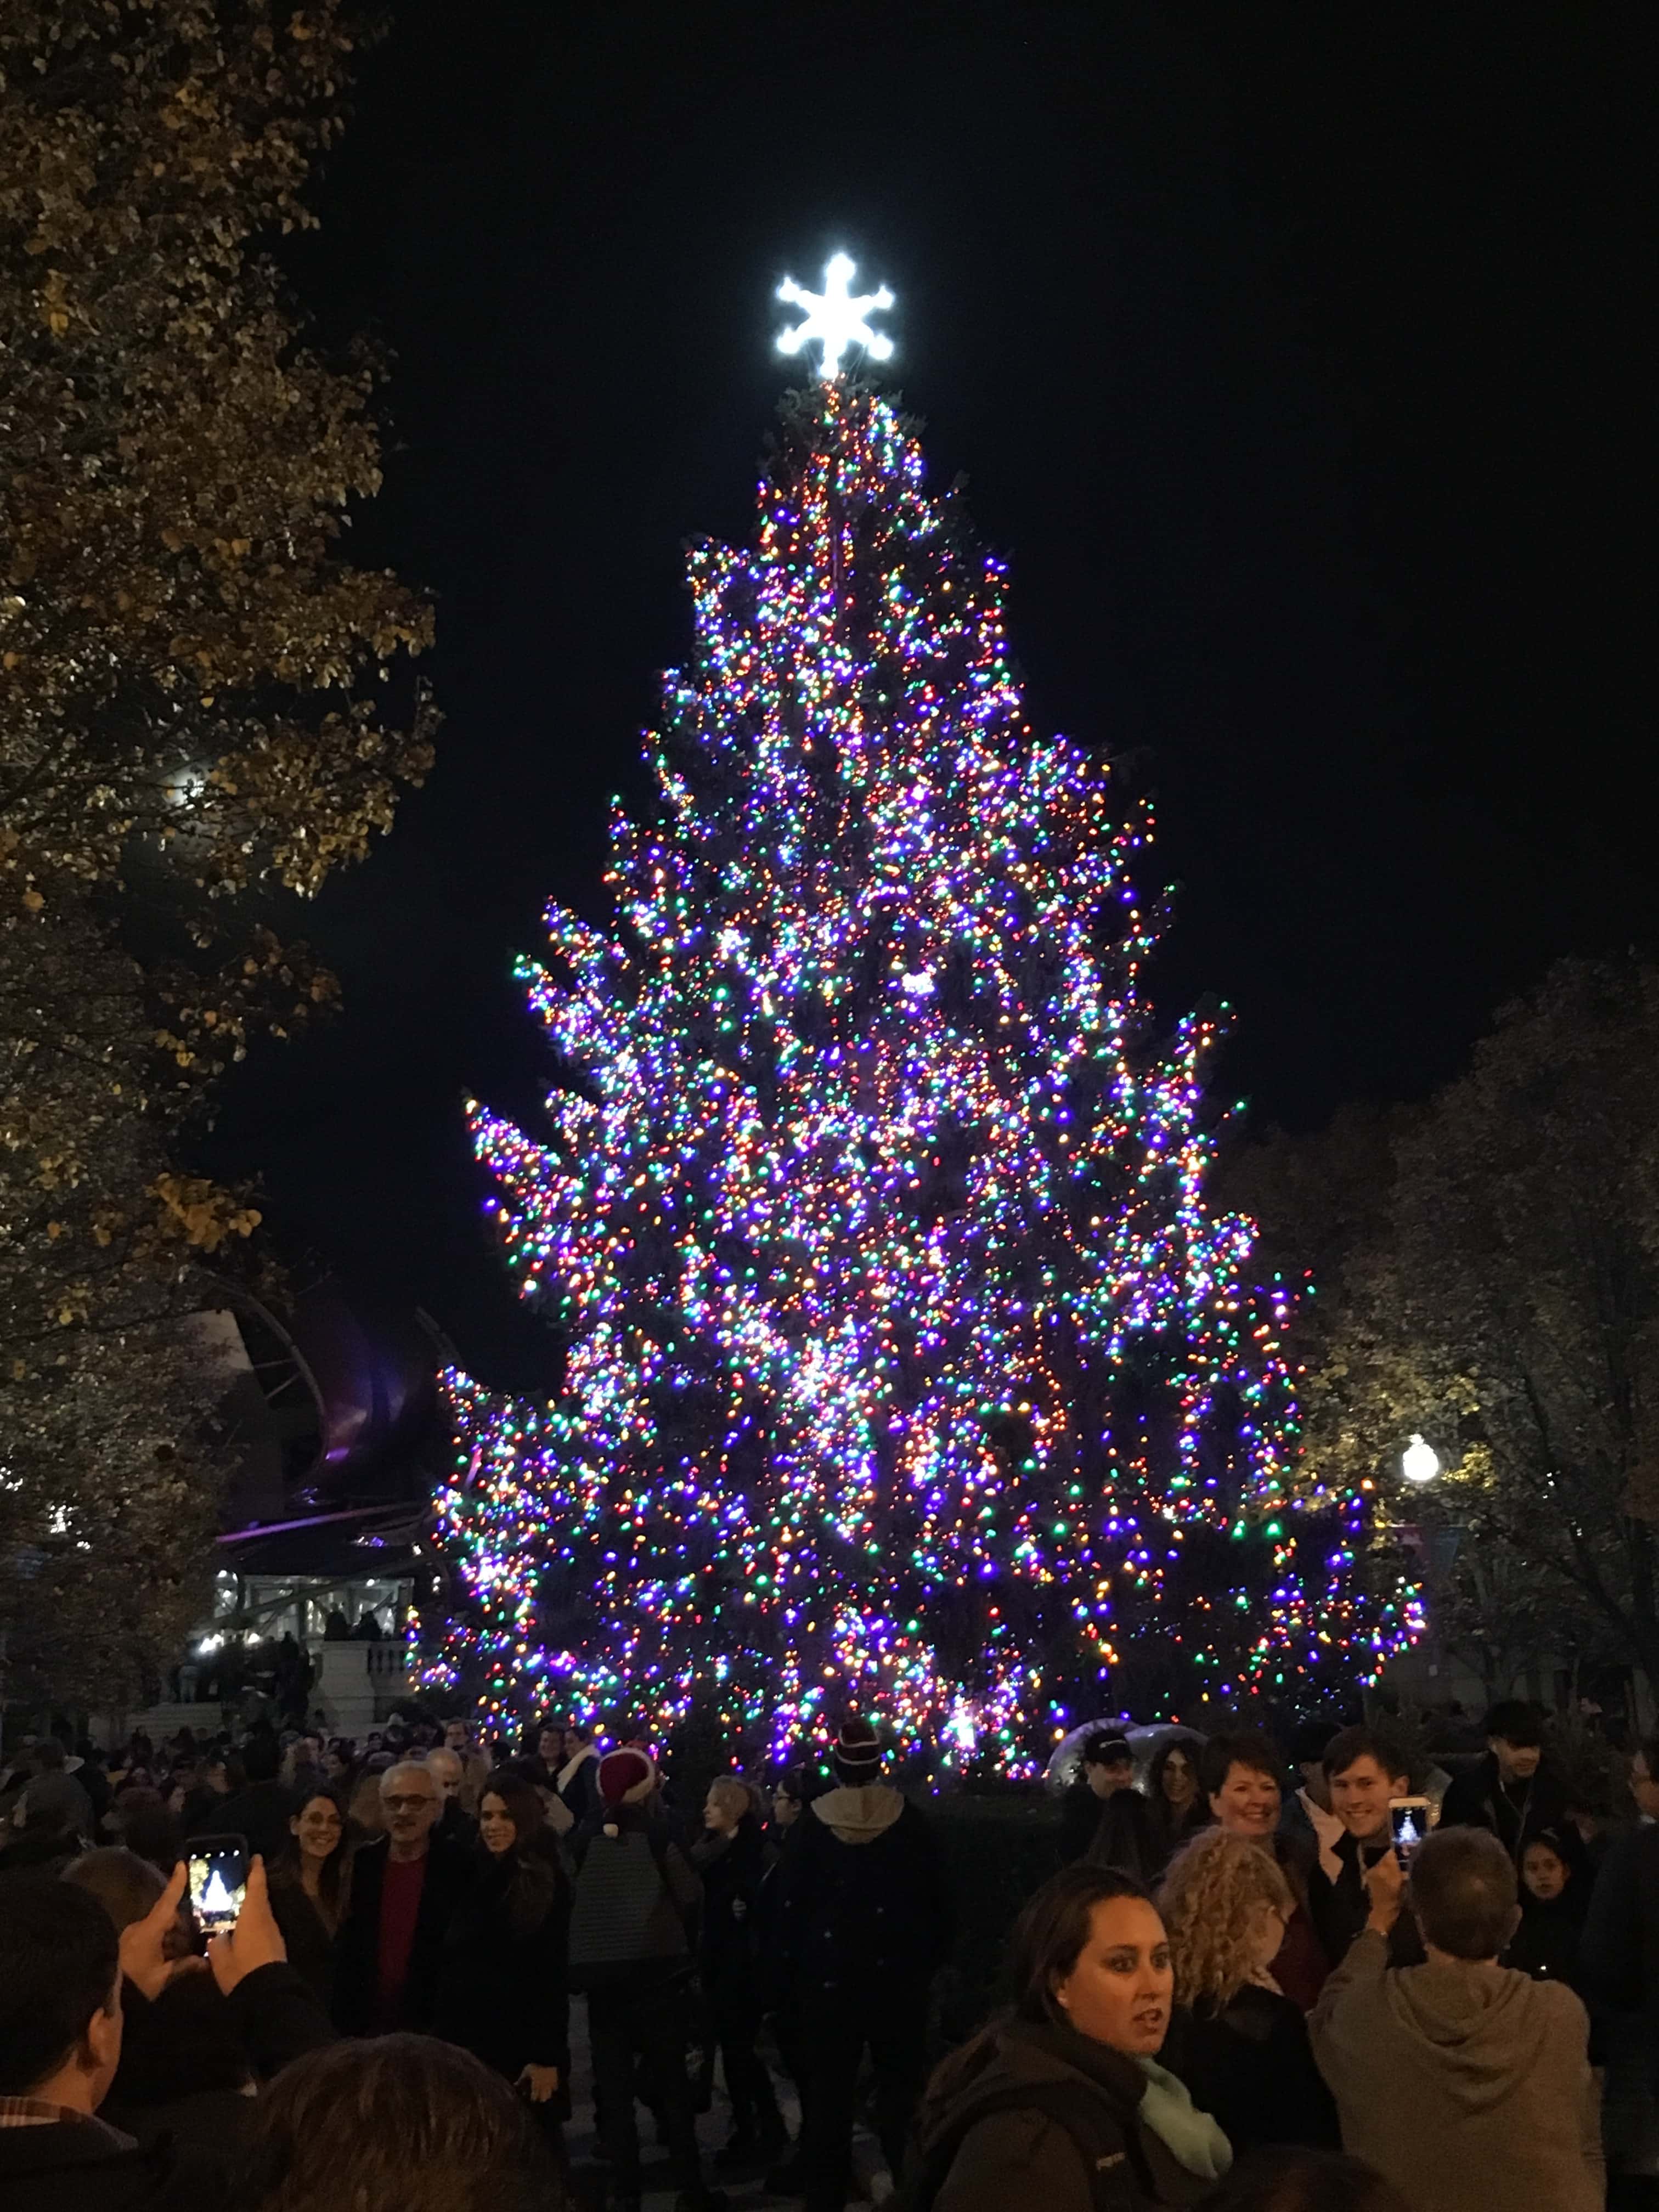 2017 Christmas tree at Millennium Park in Chicago, Illinois